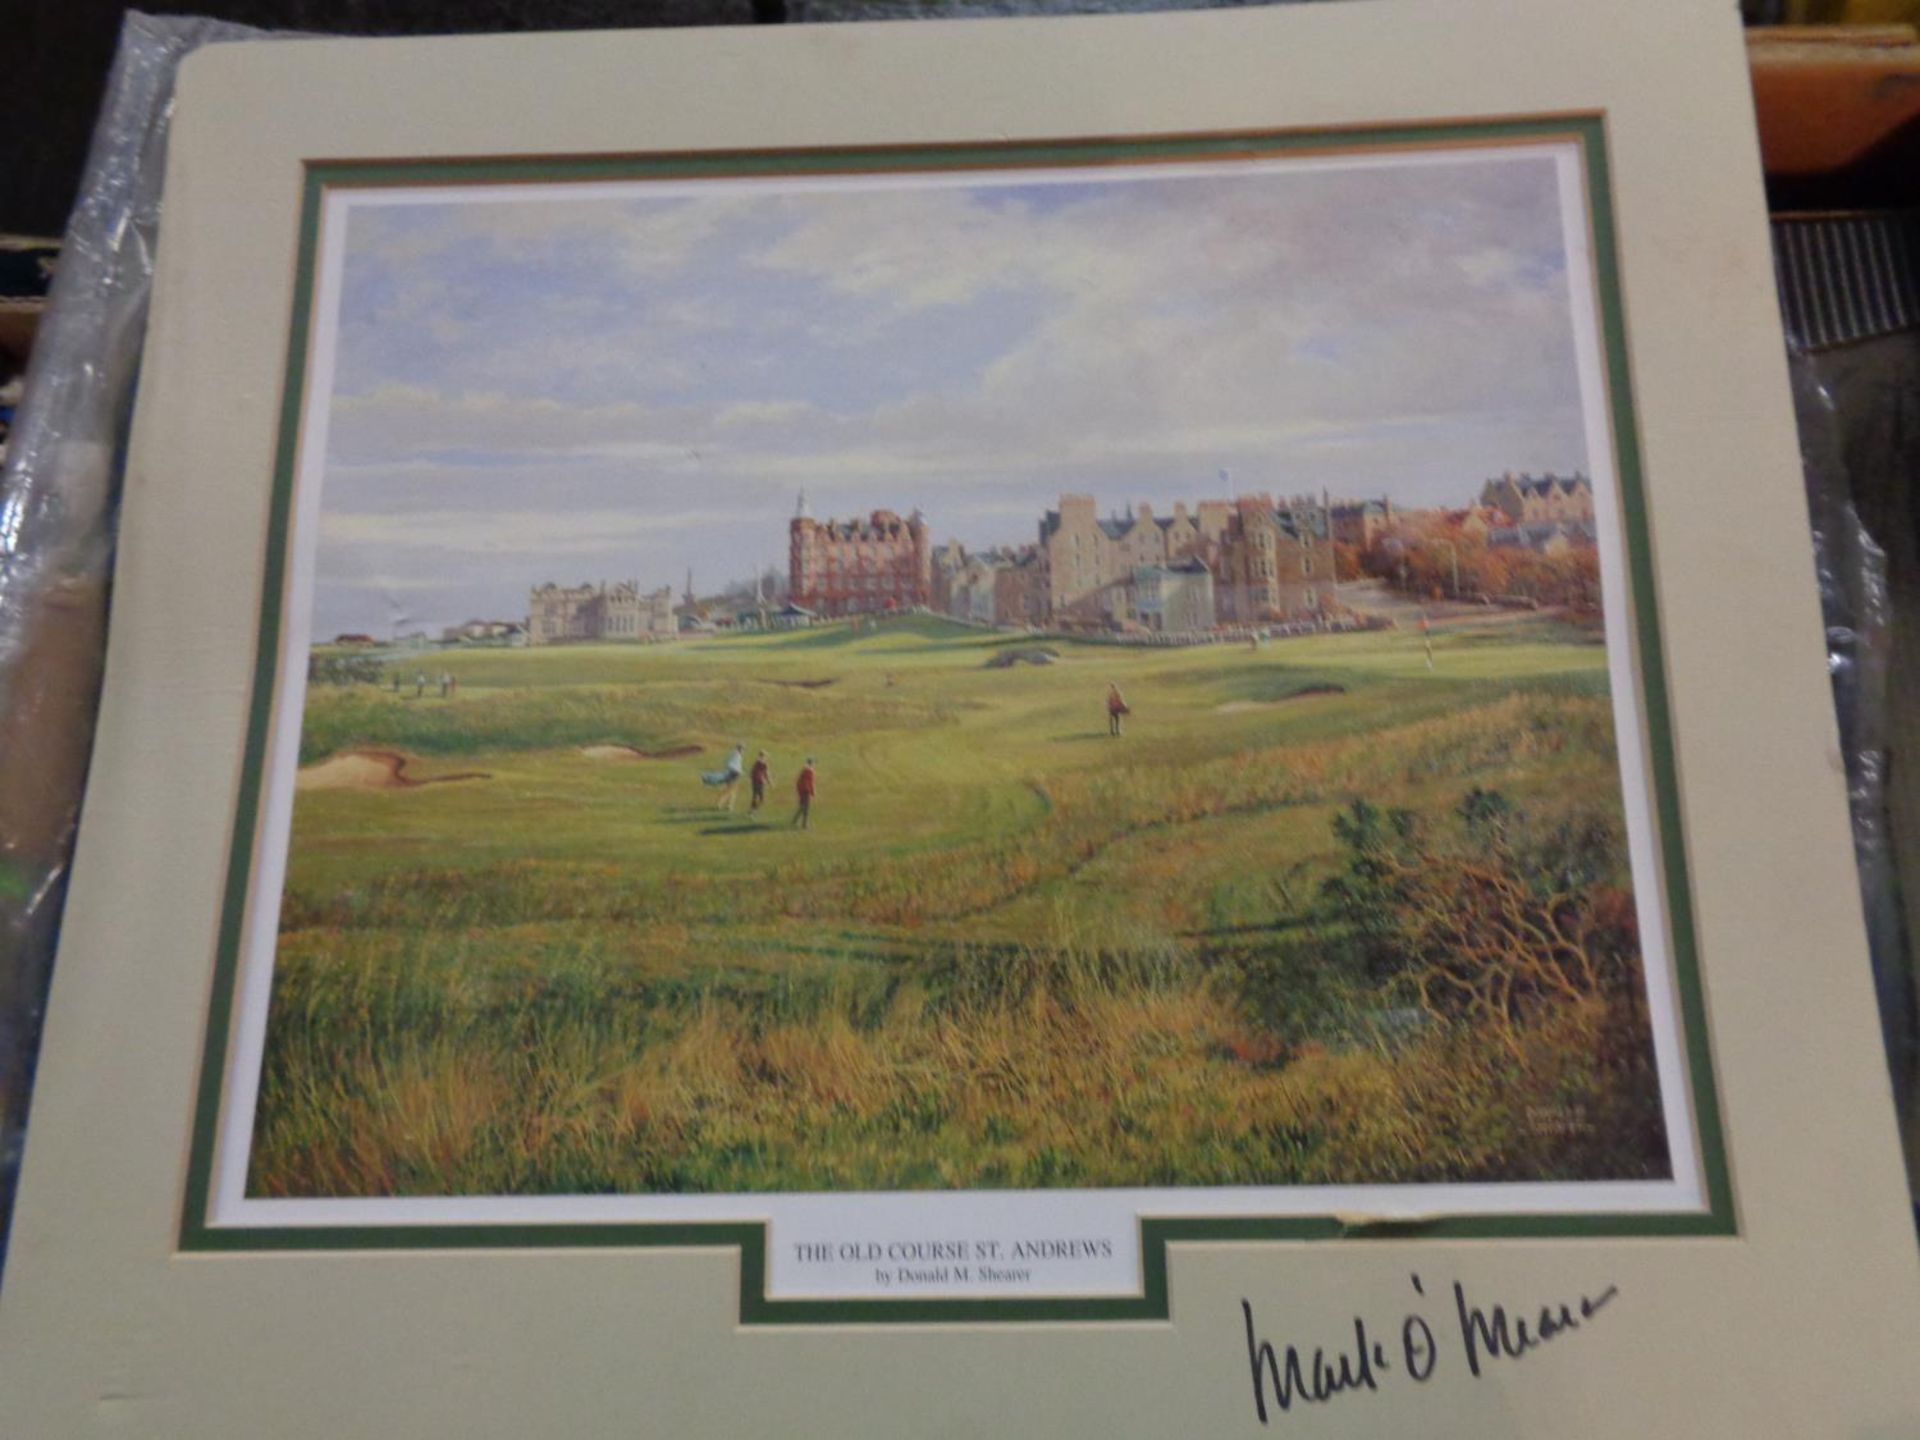 A MOUNTED PRINT OF THE OLD COURSE ST ANDREWS AUTOGRAPHED BY MARK O'MEARA, OPEN CHAMPION